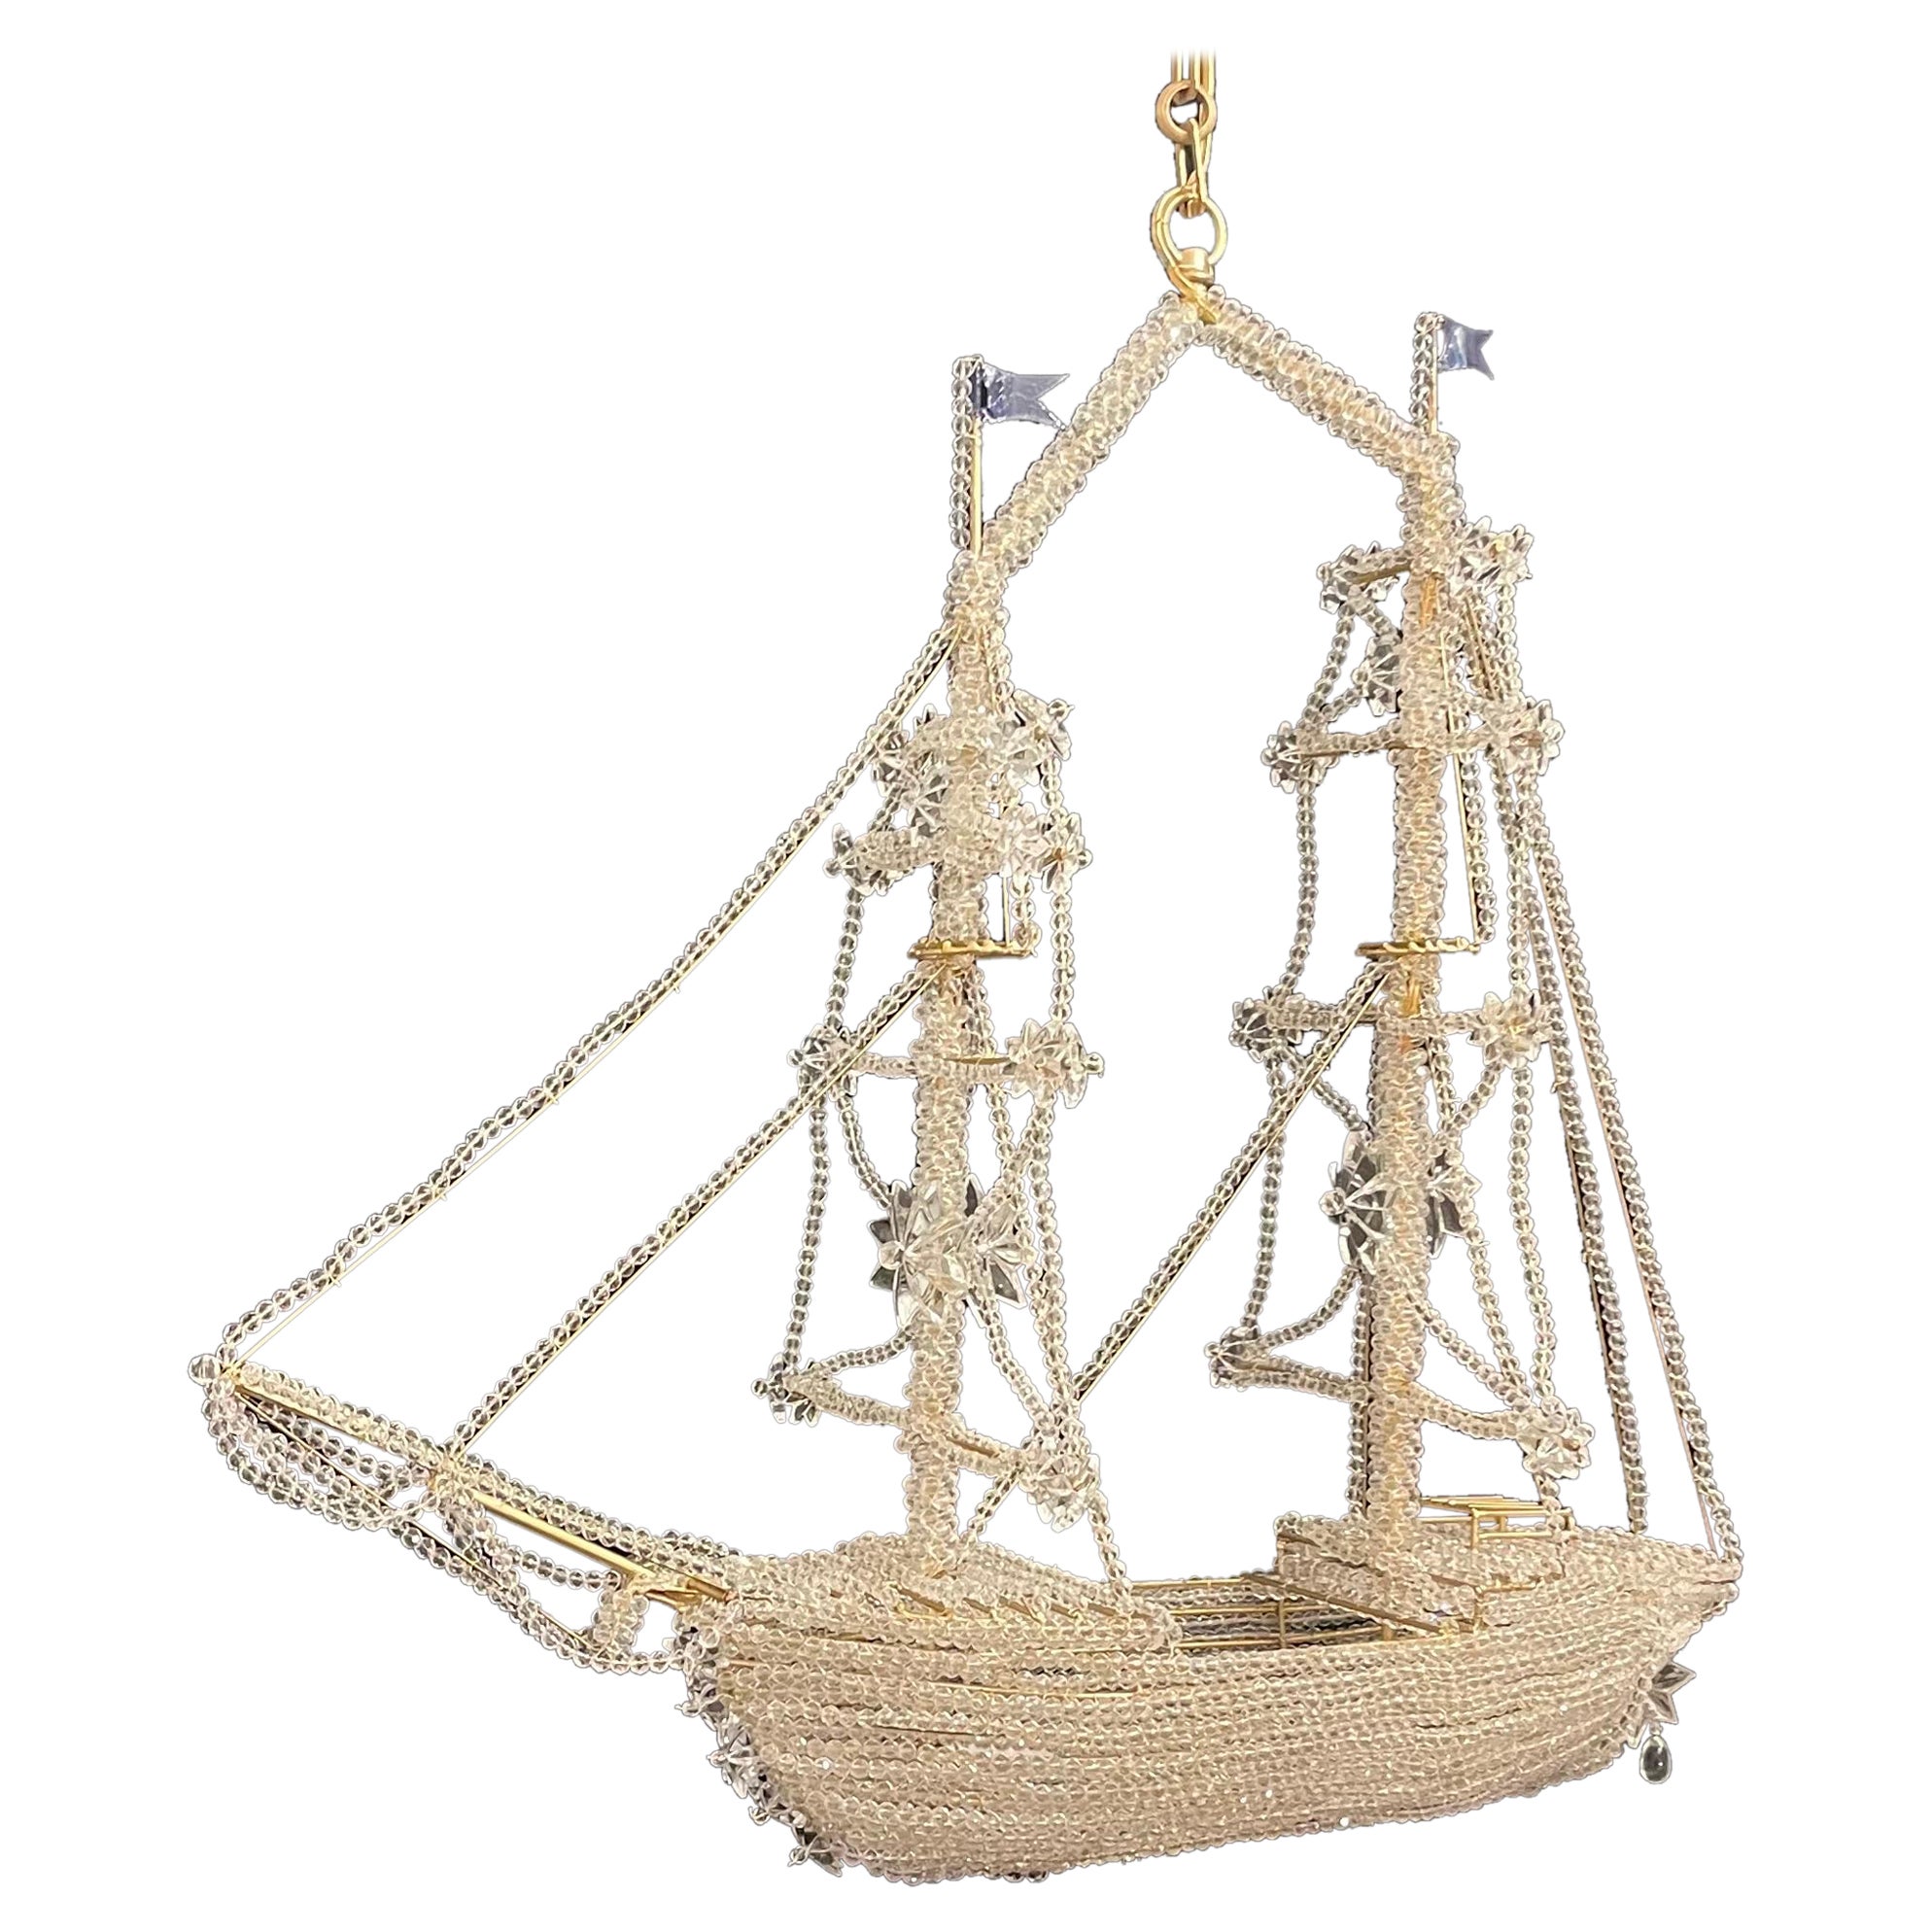 Beautiful Vintage Large Italian Crystal Beaded Gilt Boat Chandelier Ship Fixture For Sale